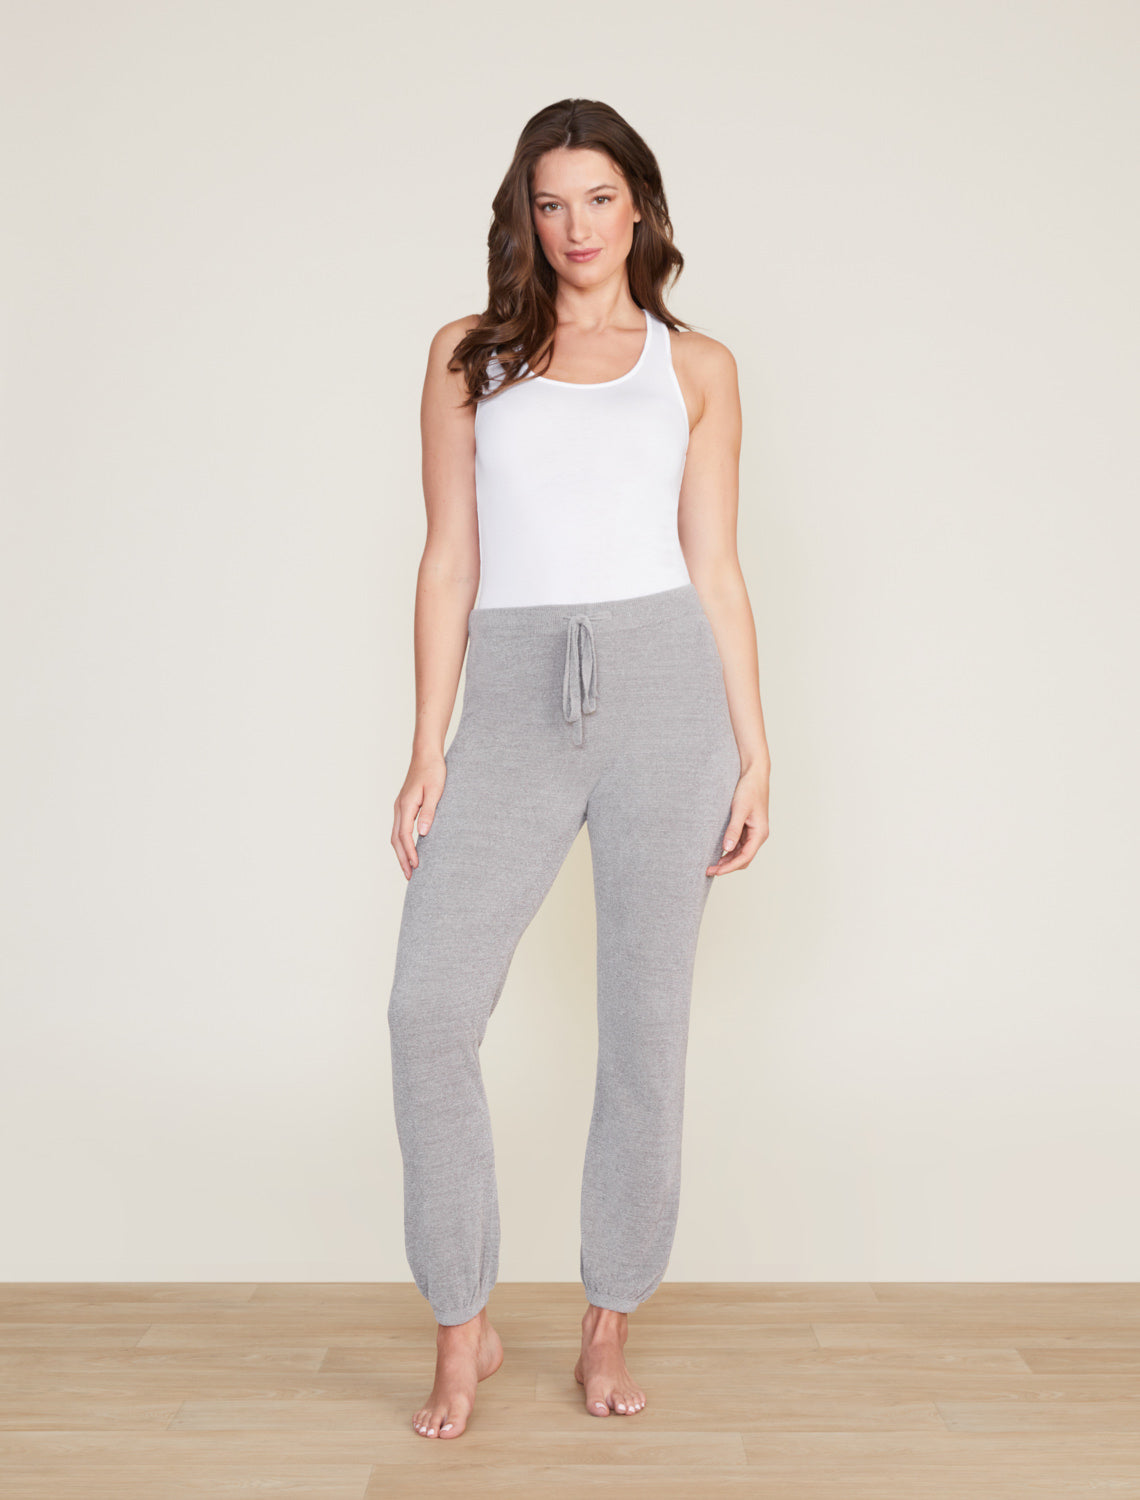 CCUL TRACK PANT - Molly's! A Chic and Unique Boutique 